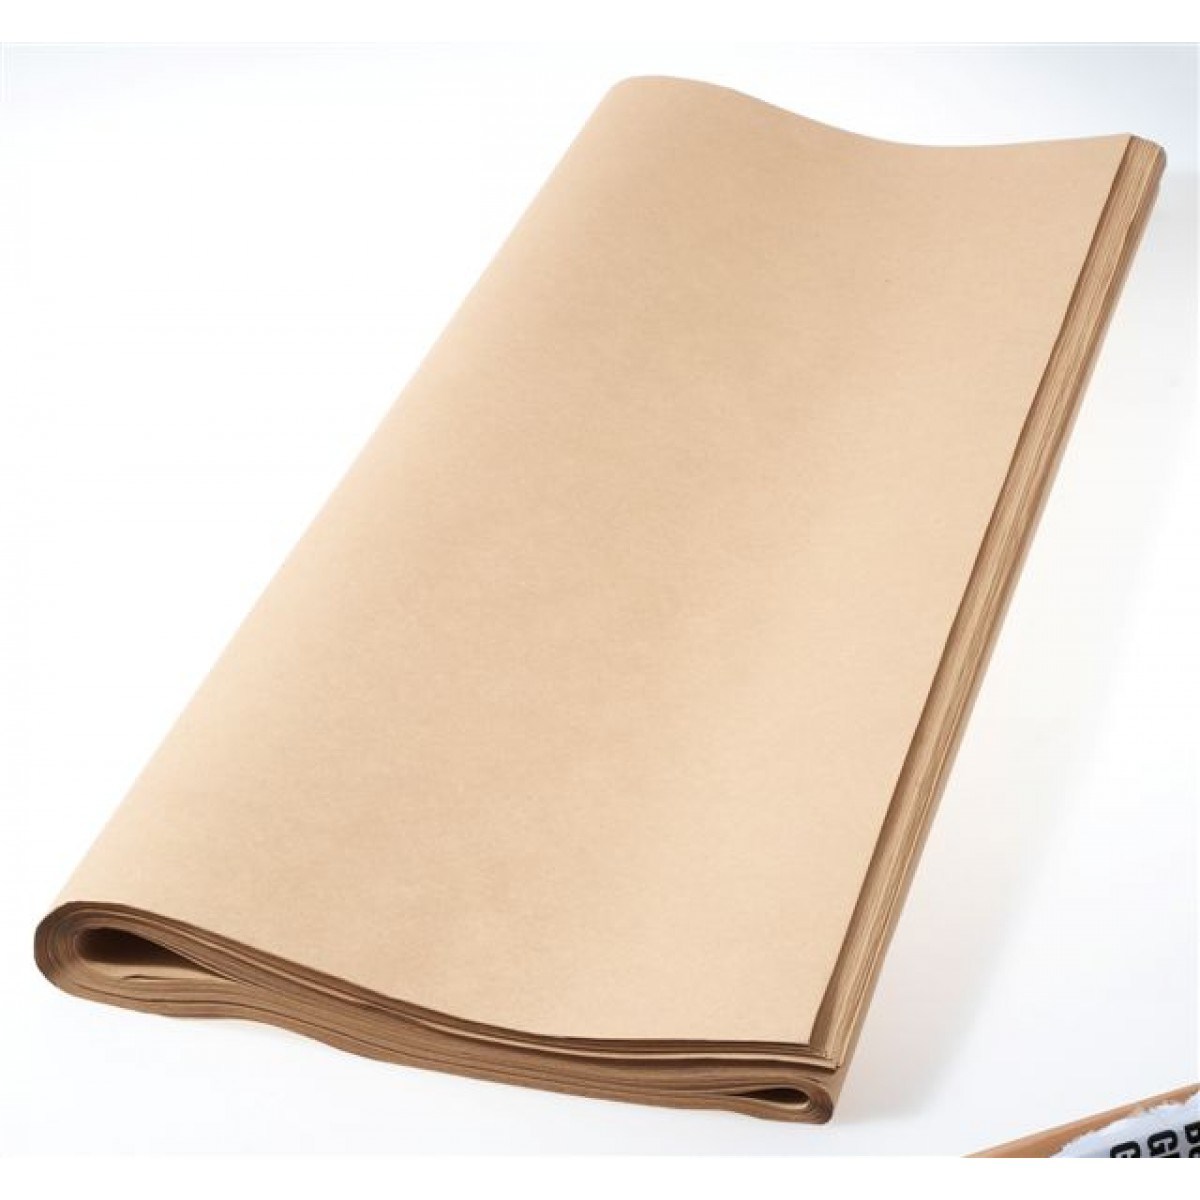 60-80GSM Kraft Paper for Sheet and Roll